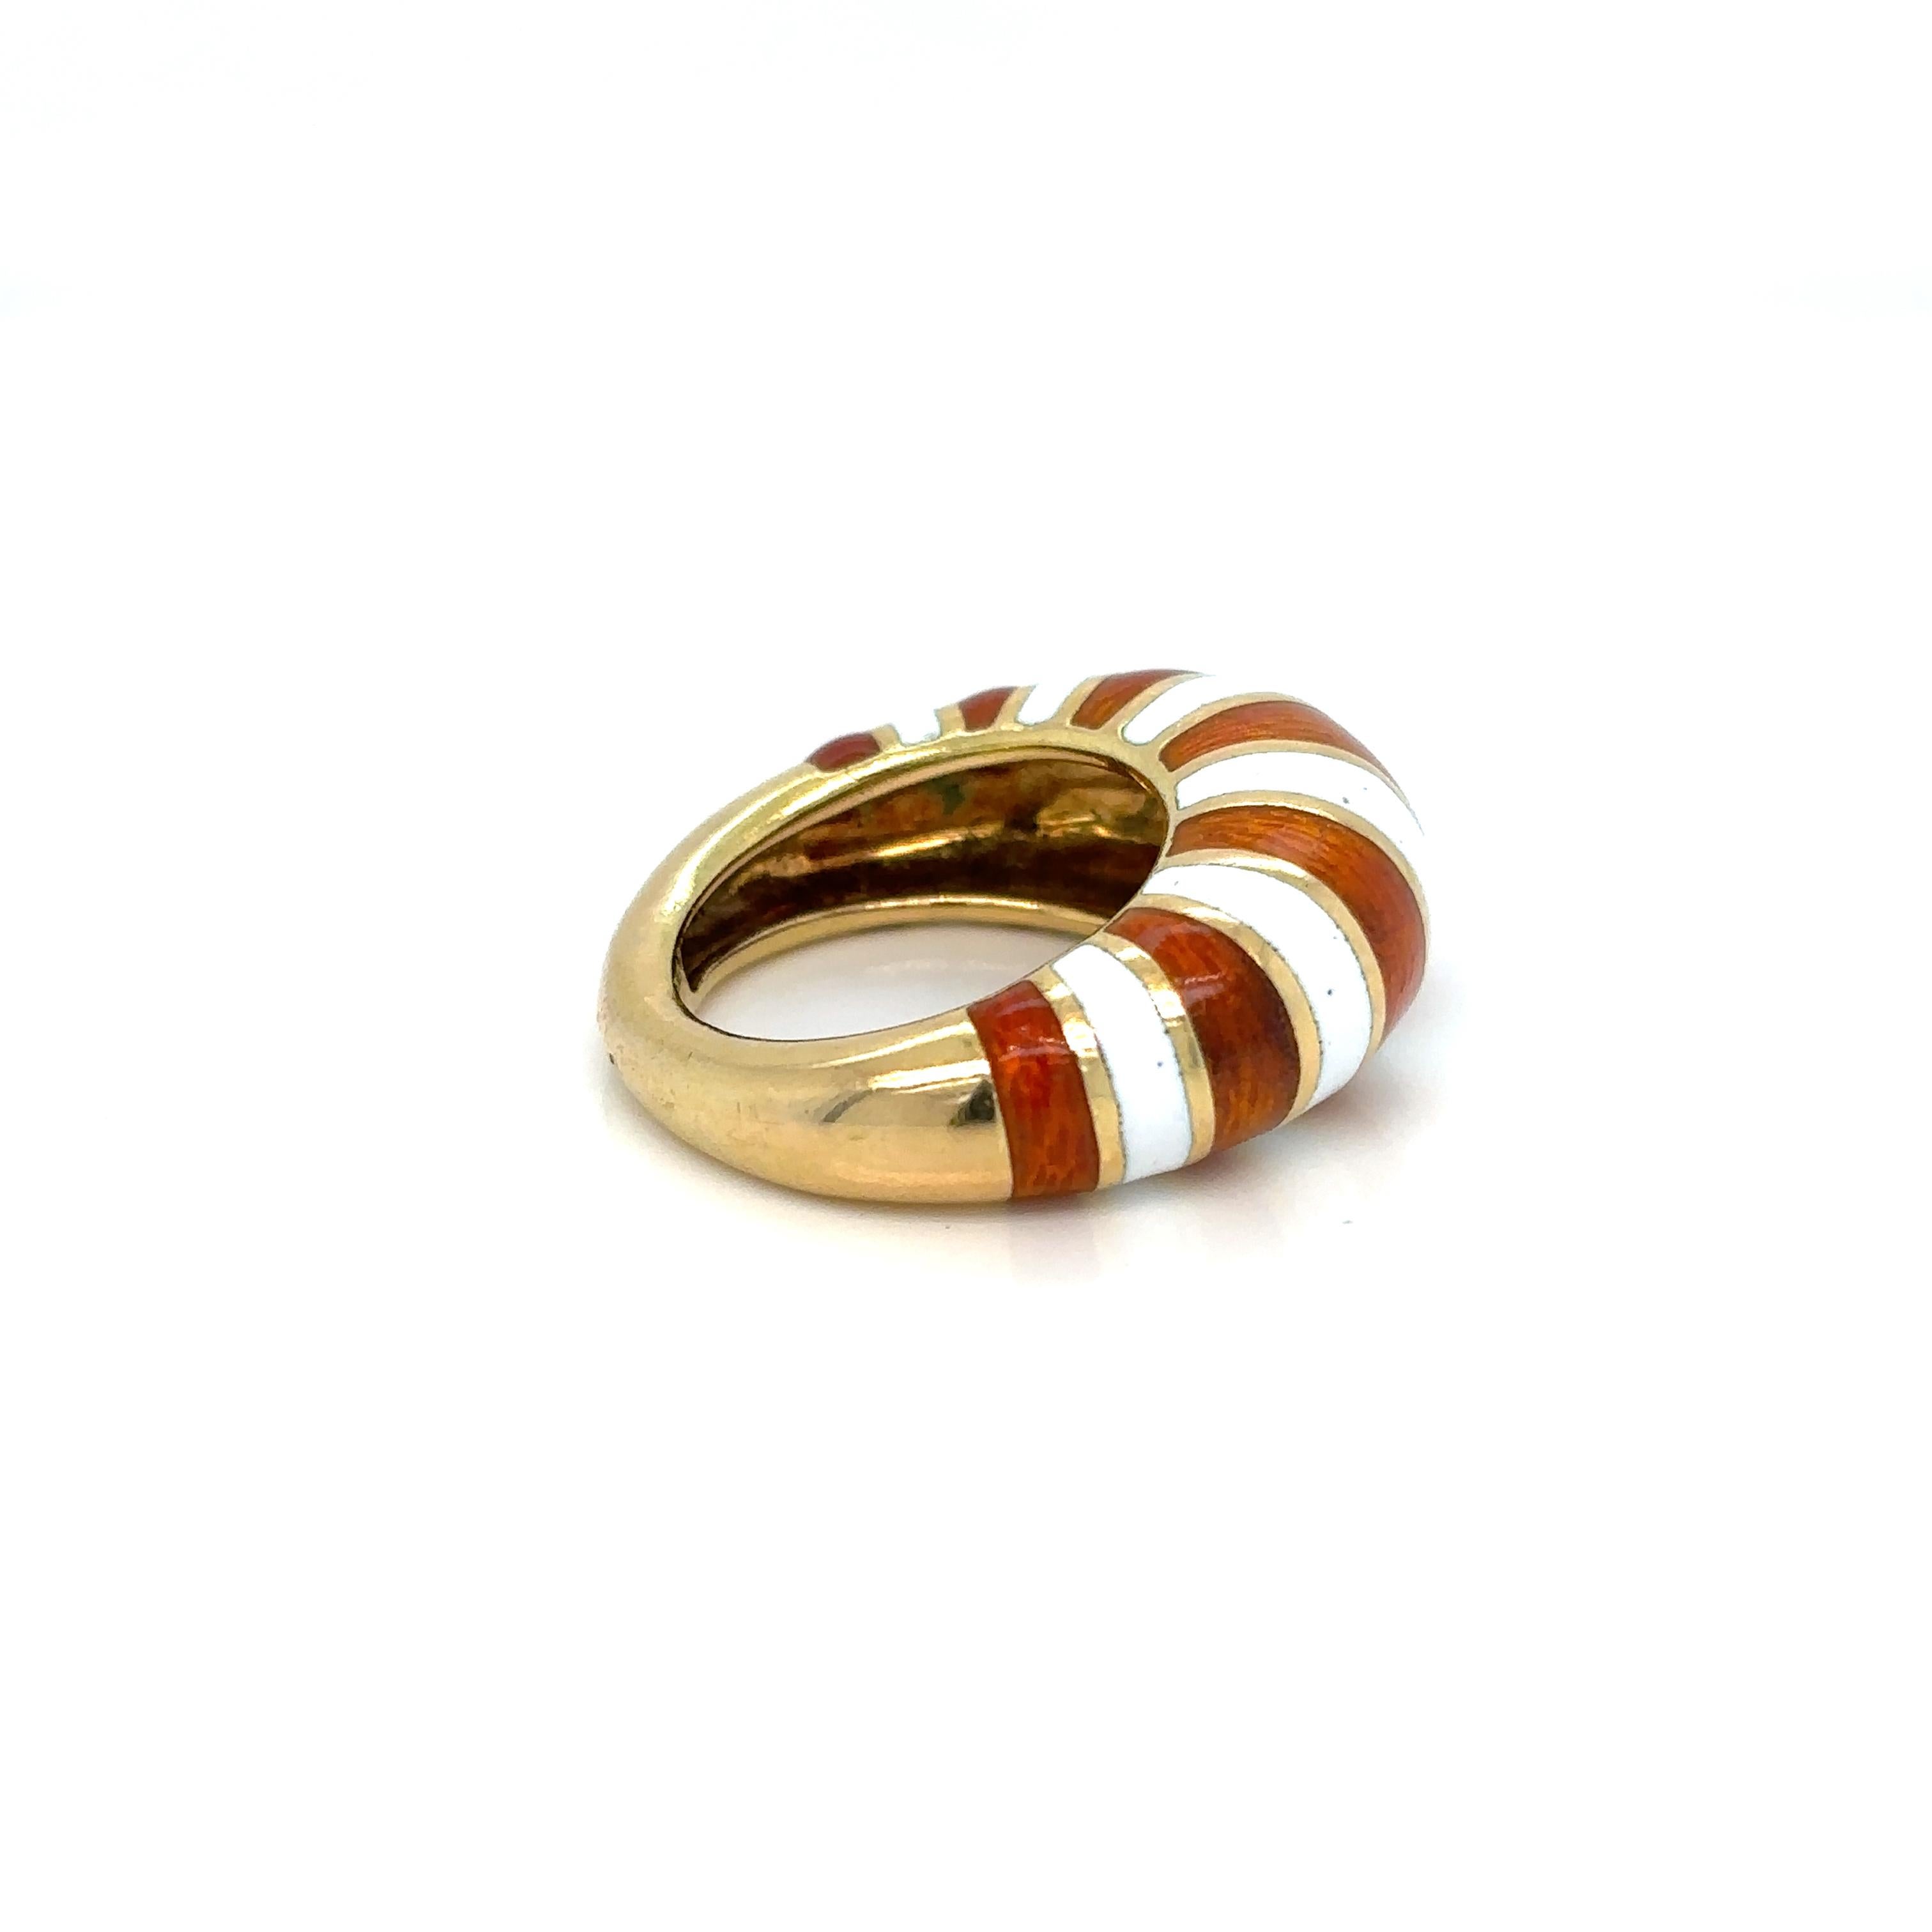 Van Cleef & Arpels Enamel Gold Ring, French, C. 1960 In Excellent Condition For Sale In Napoli, Italy